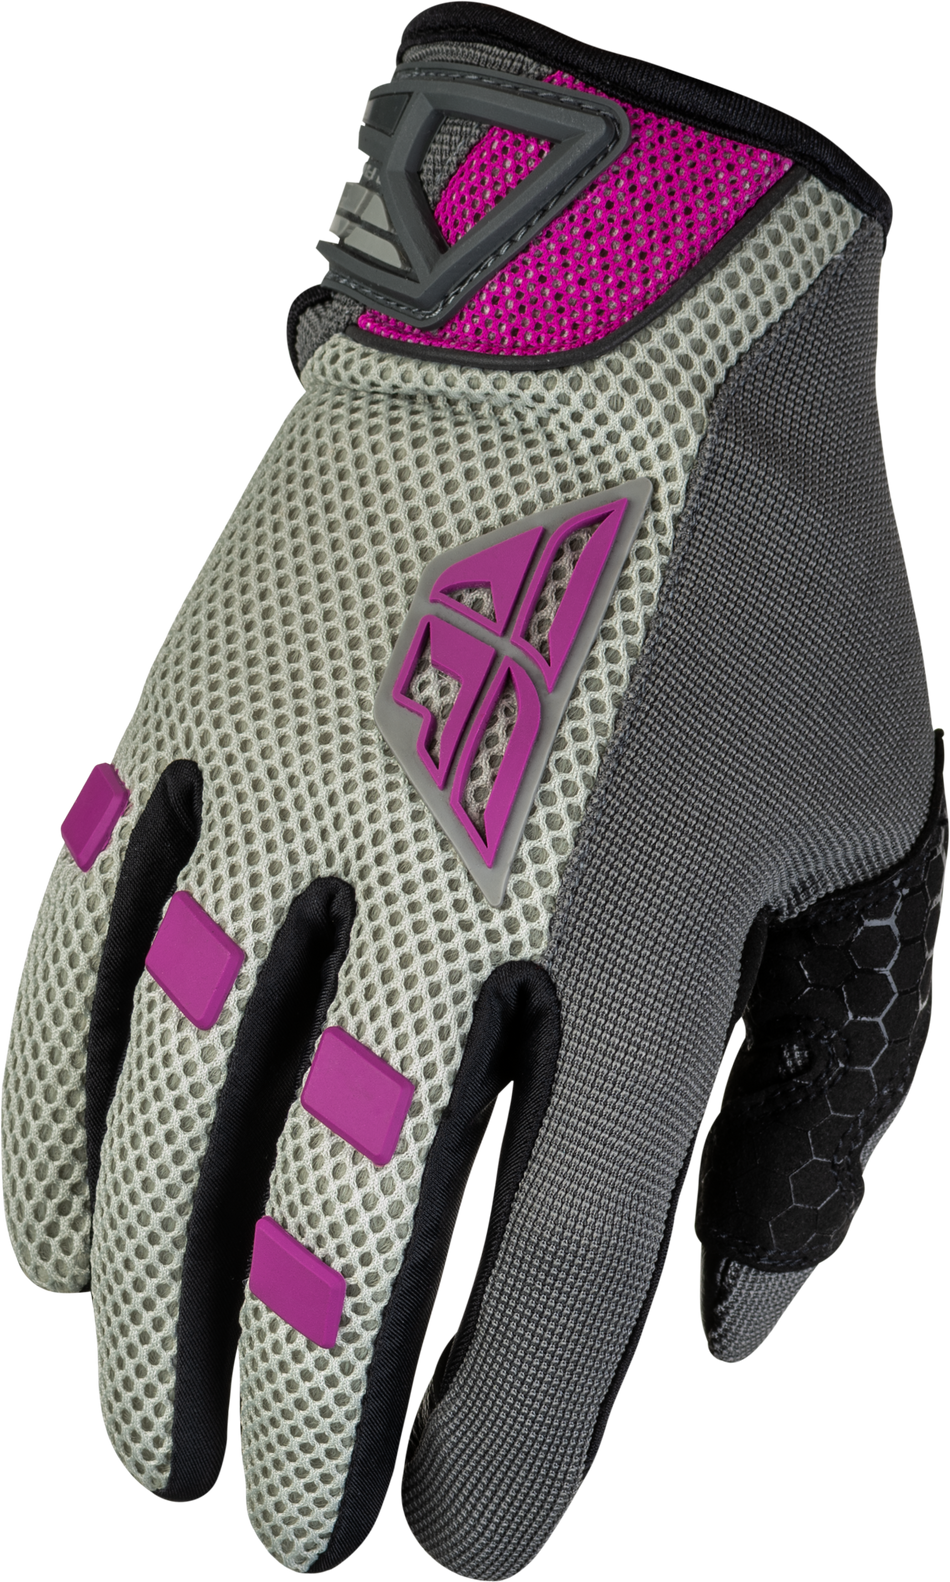 FLY RACING Women's Coolpro Gloves Grey/Pink Lg 476-6216L